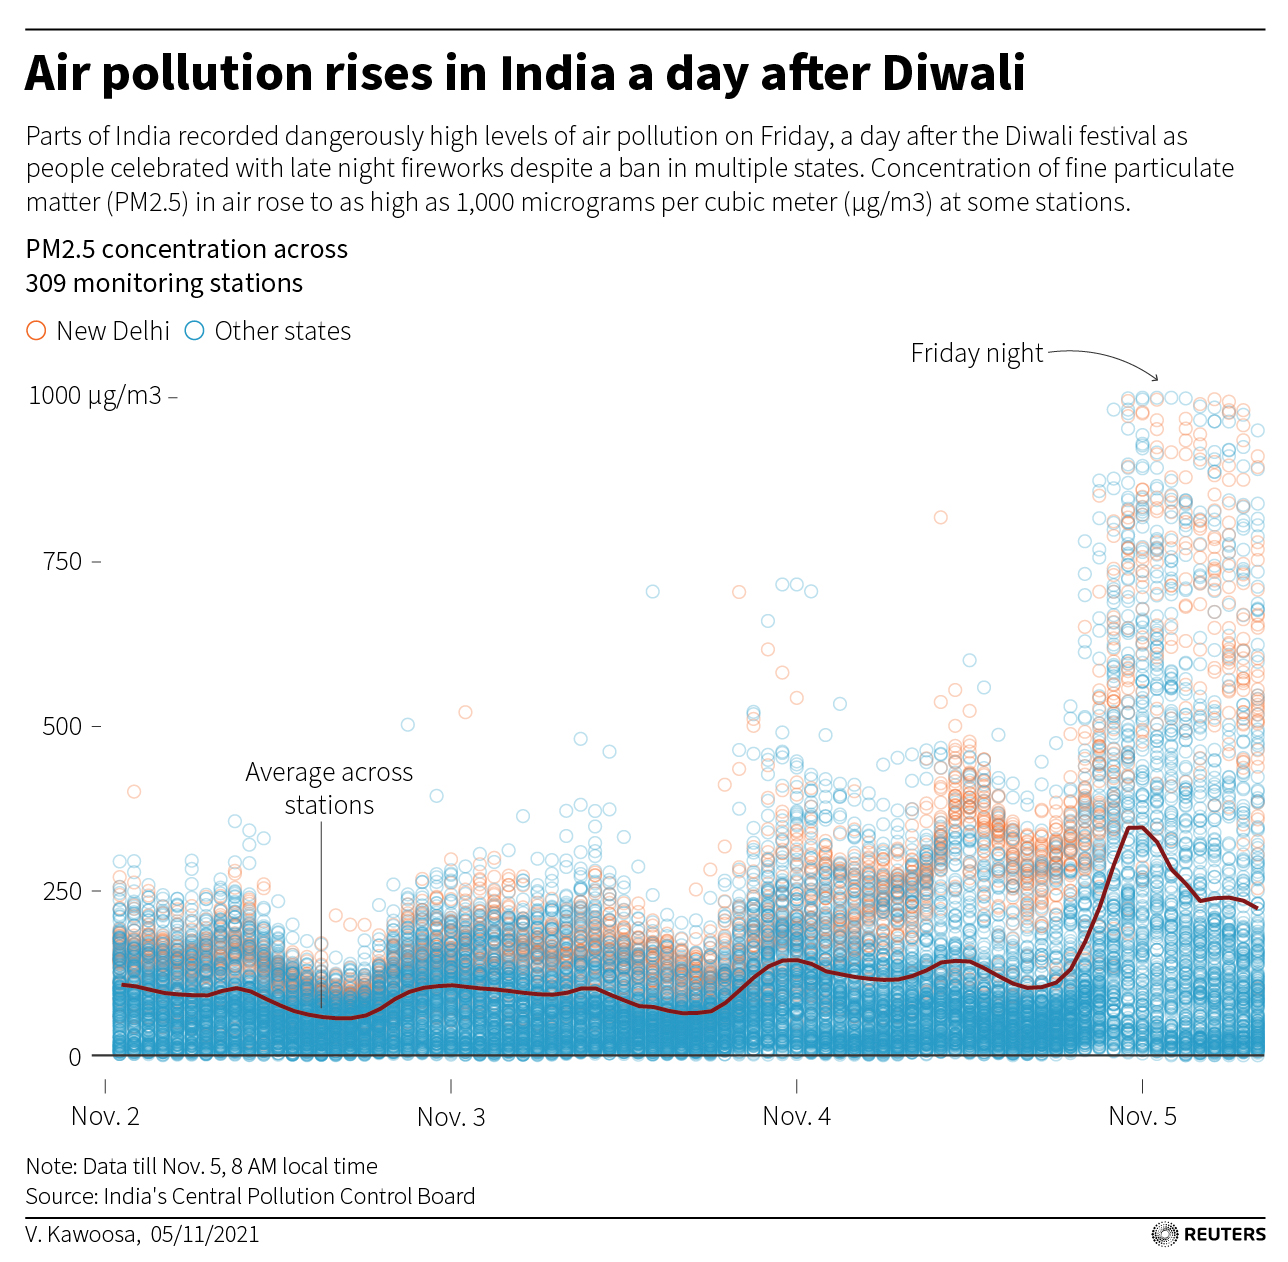 Parts of India recorded dangerously high levels of air pollution on Friday, a day after the Diwali festival as people celebrated with late night fireworks despite a ban in multiple states.